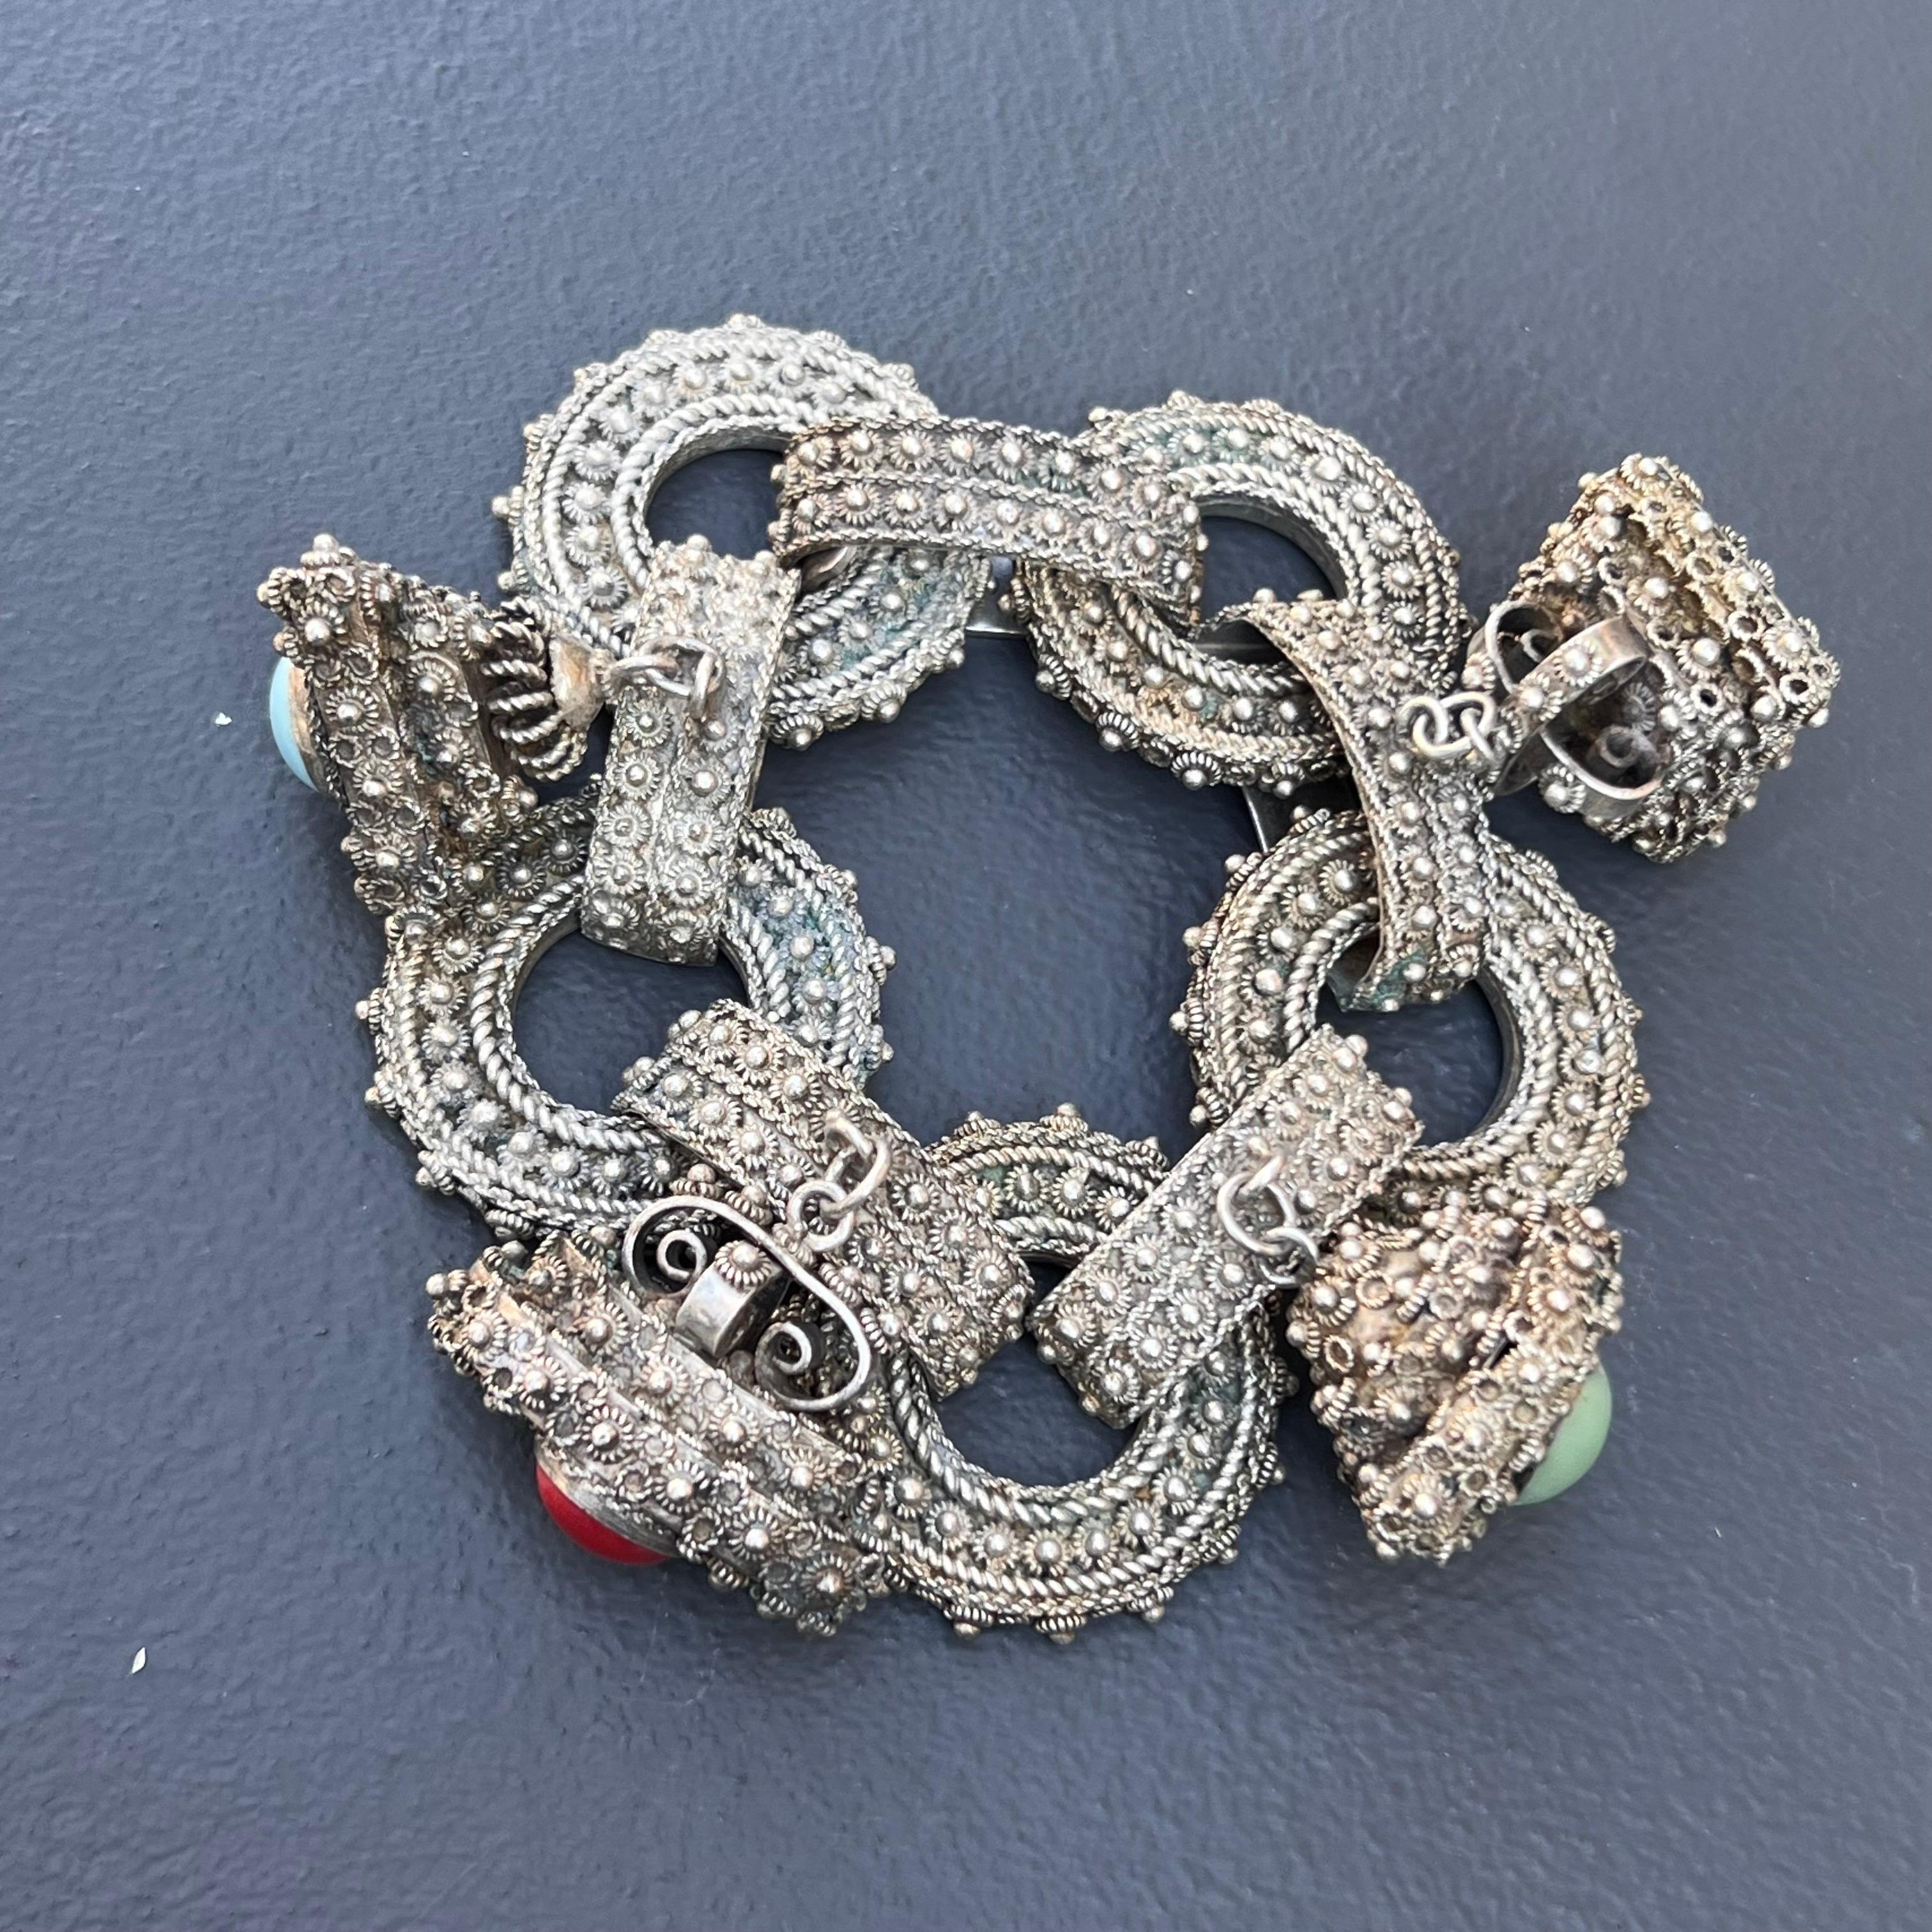 Exquisite Vintage Signed  Papa George Lebanon silver fob /charm bracelet with a wide linked chain with 4 fobs /charm with fine Etruscan style applied wire and bead work .One of the fob opens to reveal an hidden chamber. Fobs have polished cabochons